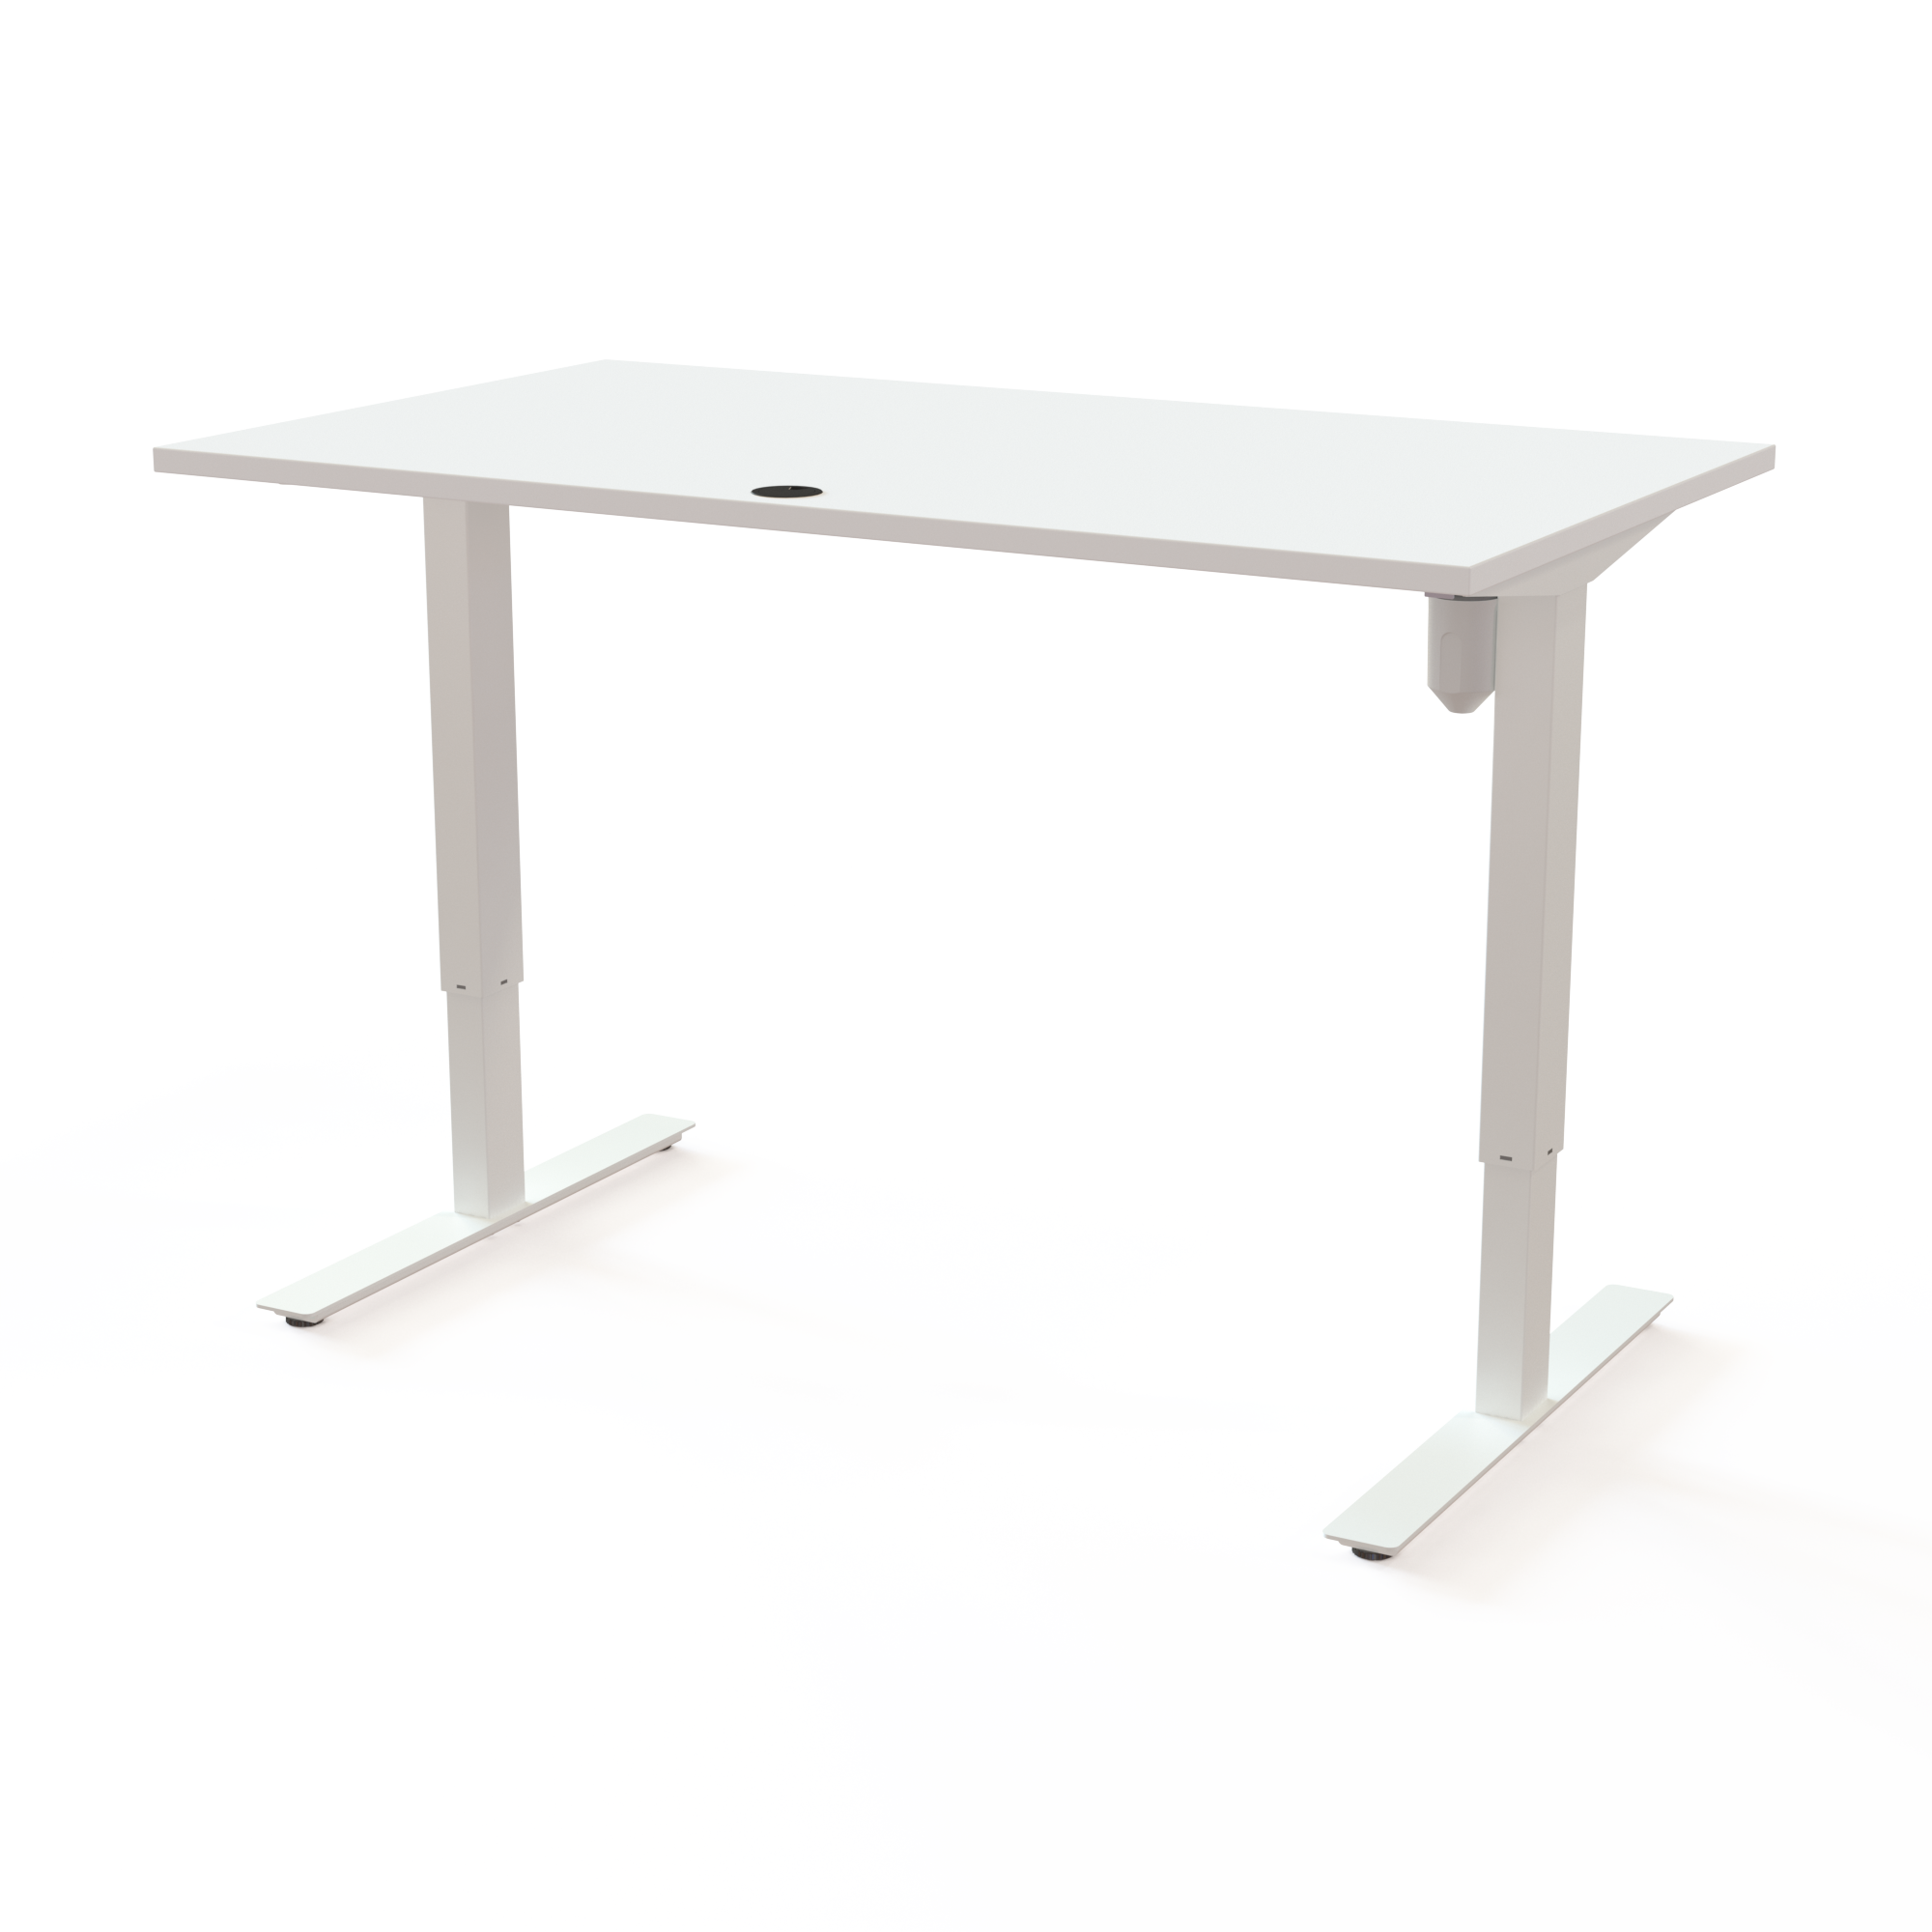 Electric Adjustable Desk | 140x80 cm | White with white frame